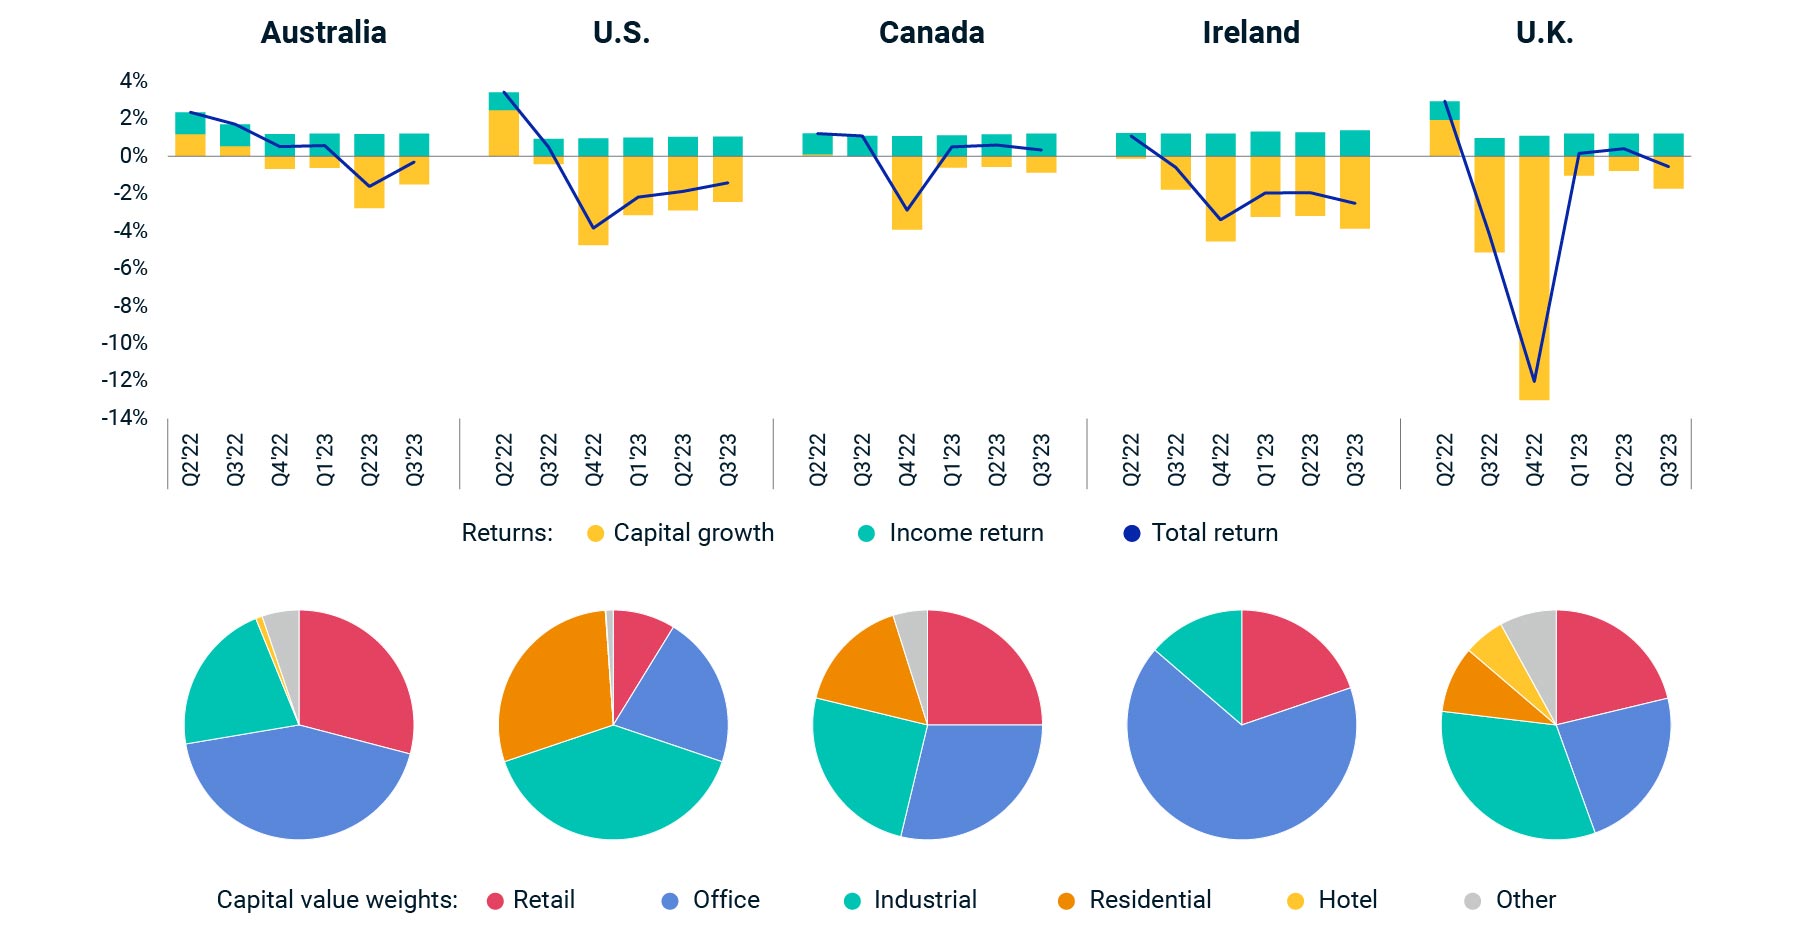 This small-multiples chart shows recent quarterly performance trends and capital value weights for property indexes for Australia, Canada, Ireland, the U.K. and U.S.